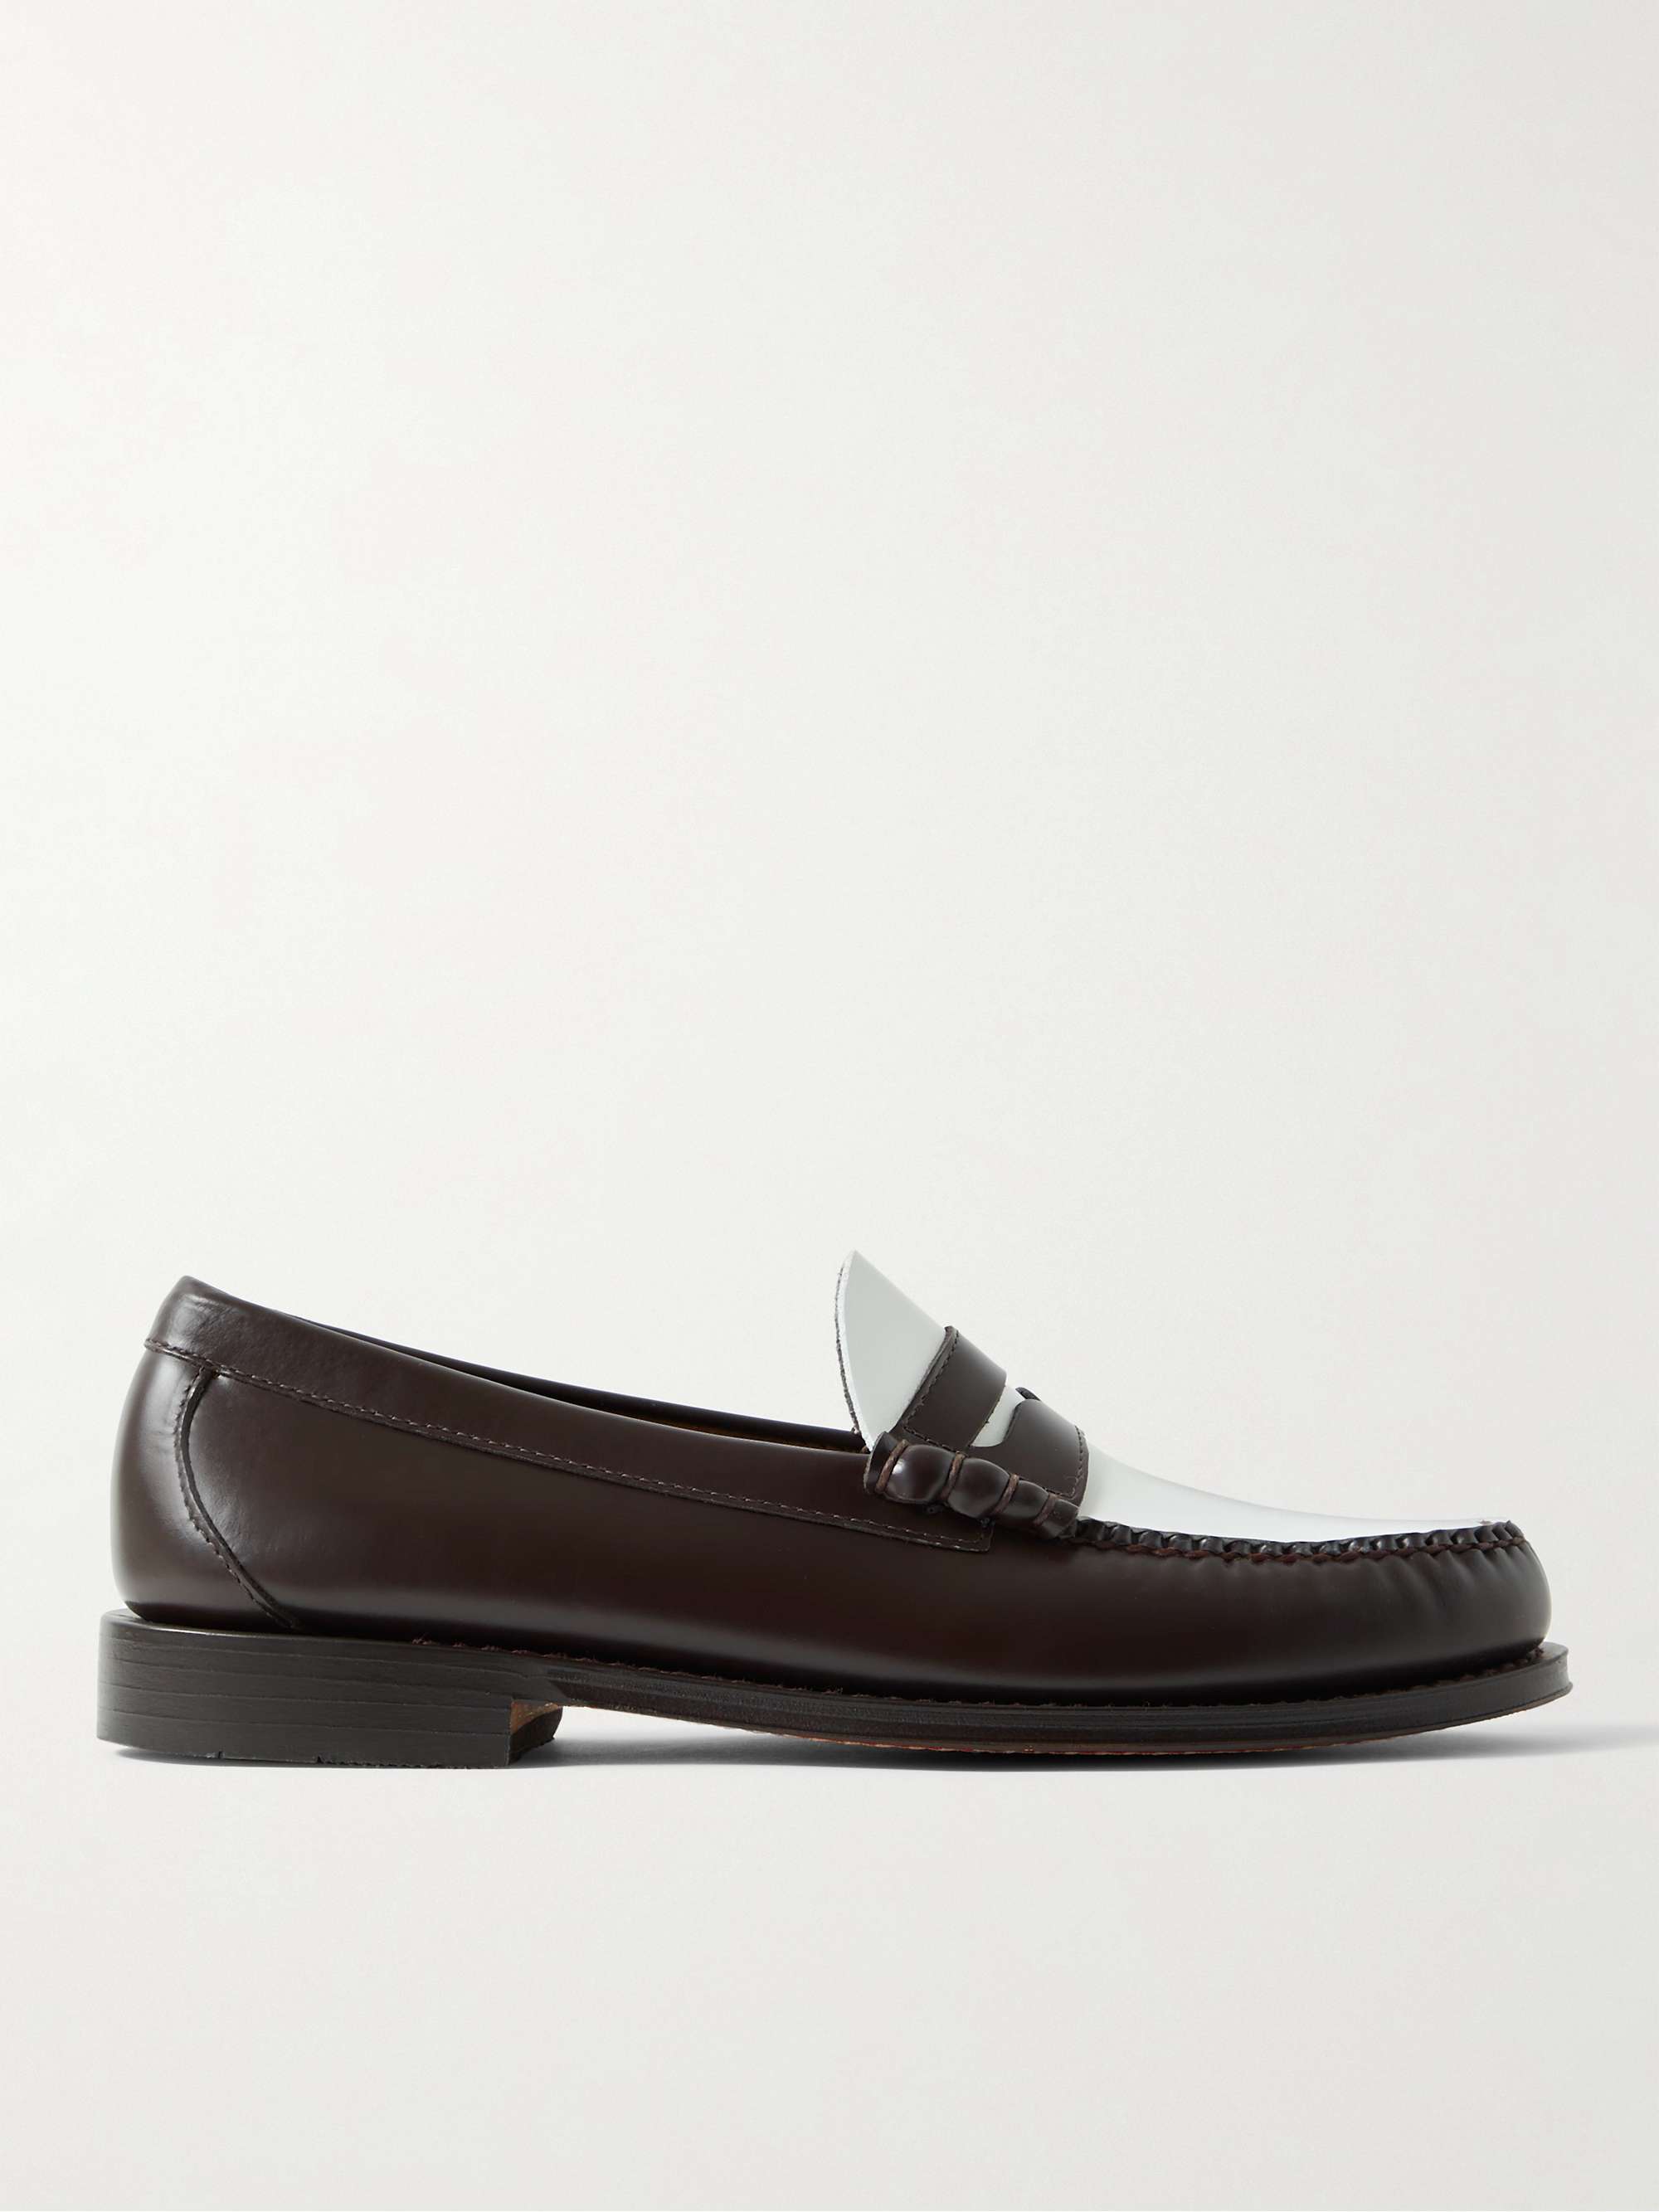 G.H. BASS & CO. Weejuns Heritage Larson Colour-Block Leather Penny Loafers  for Men | MR PORTER